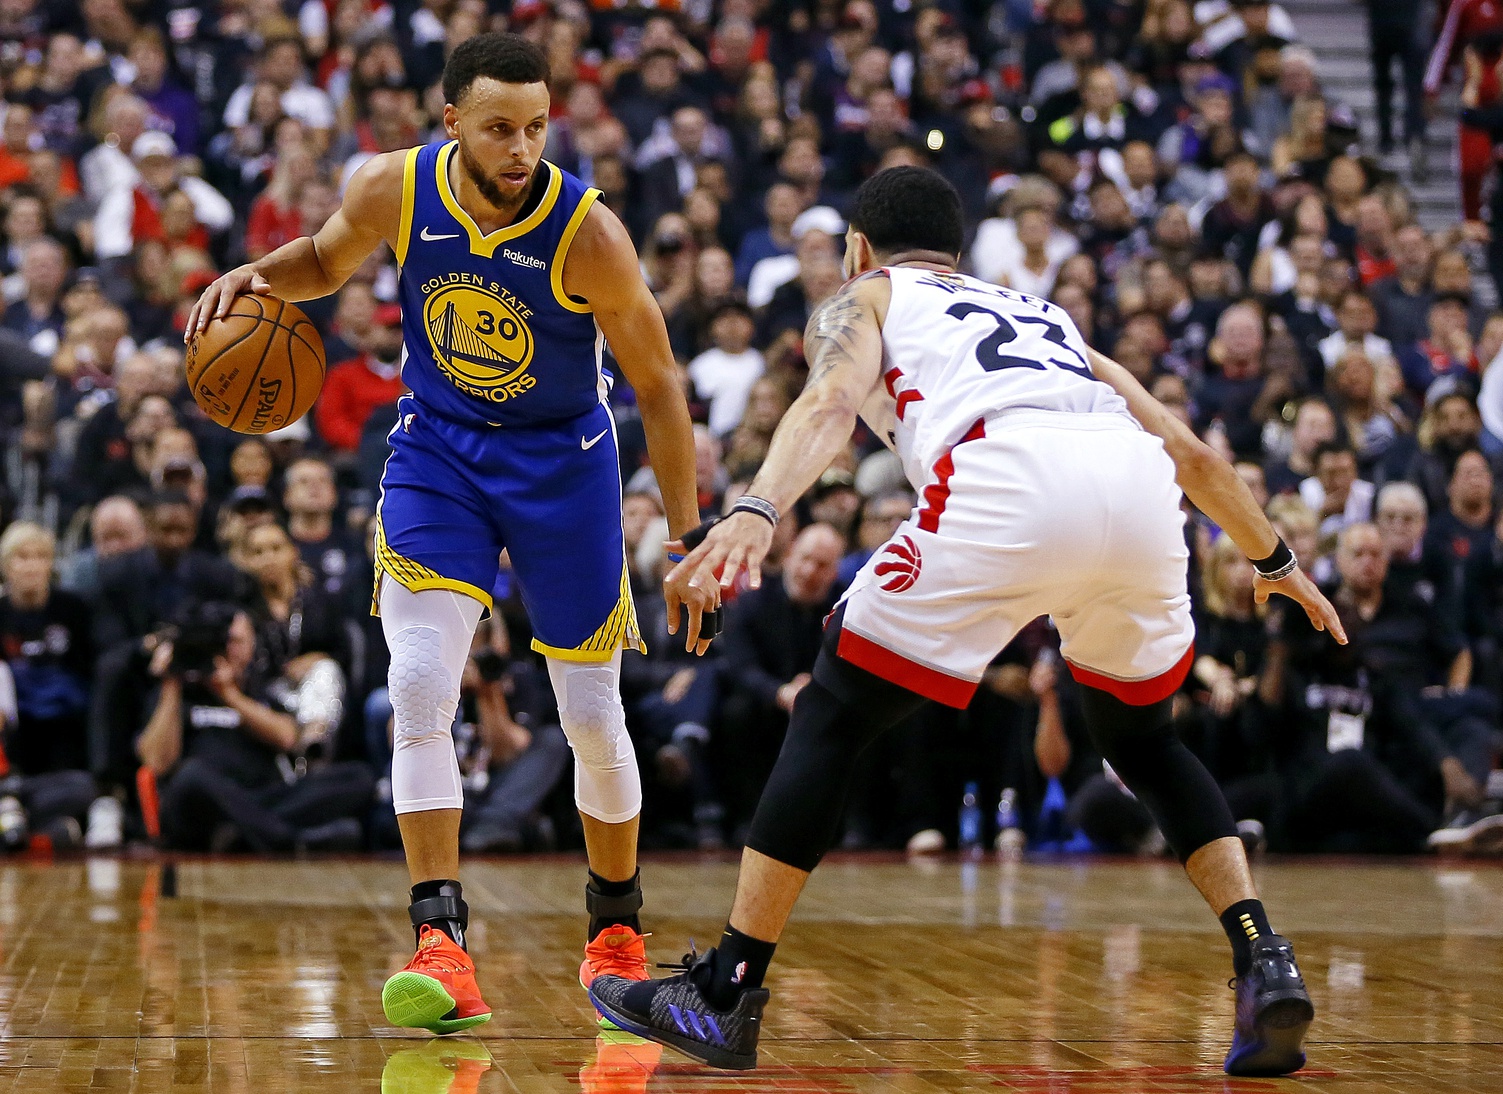 Is Stephen Curry the greatest Golden State Warrior of all time?